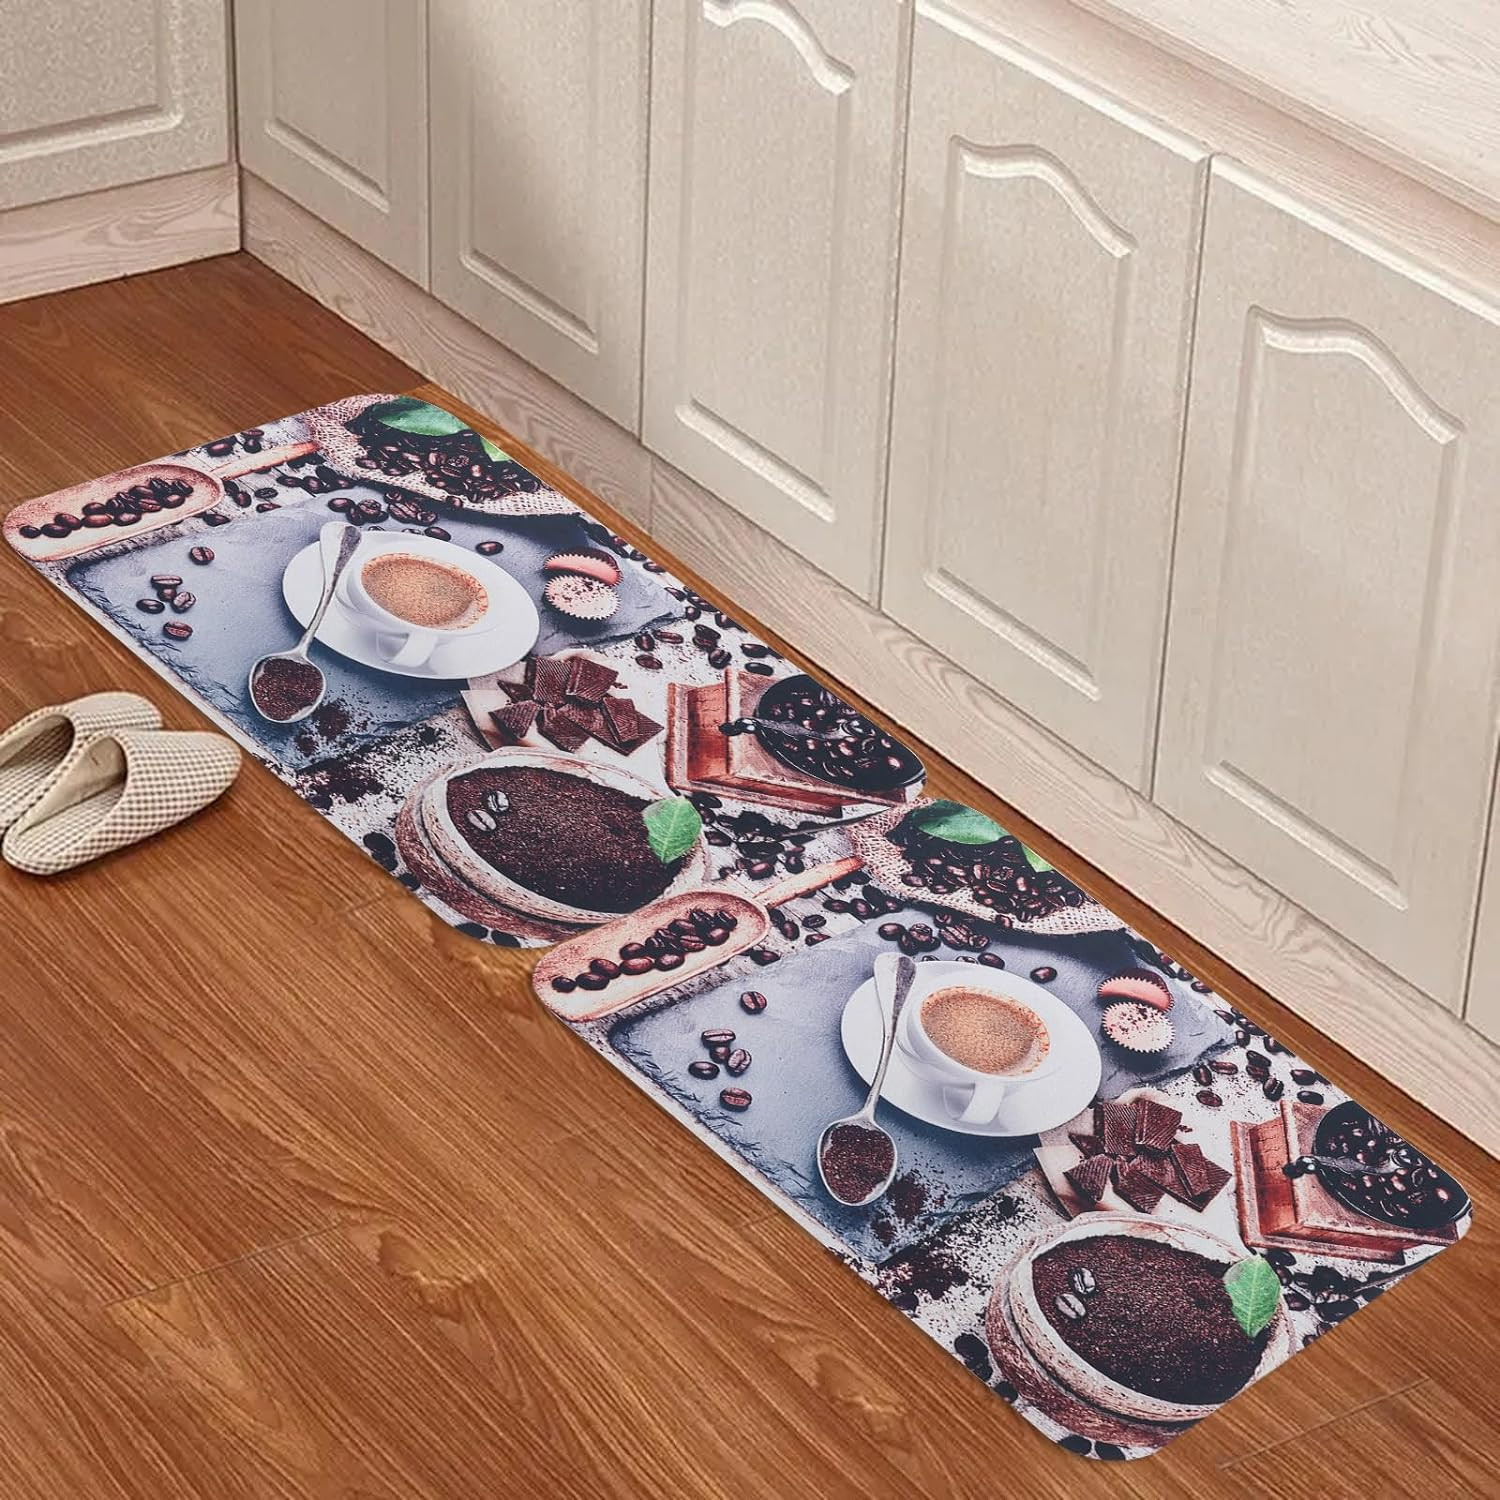 Kuber Industries PVC Kitchen Floor Mat|Anti-Skid Backing|Mats for Kitchen Floor |Easily Washable|Idol for Home, Kitchen Entrance| CF-220810 | Multi